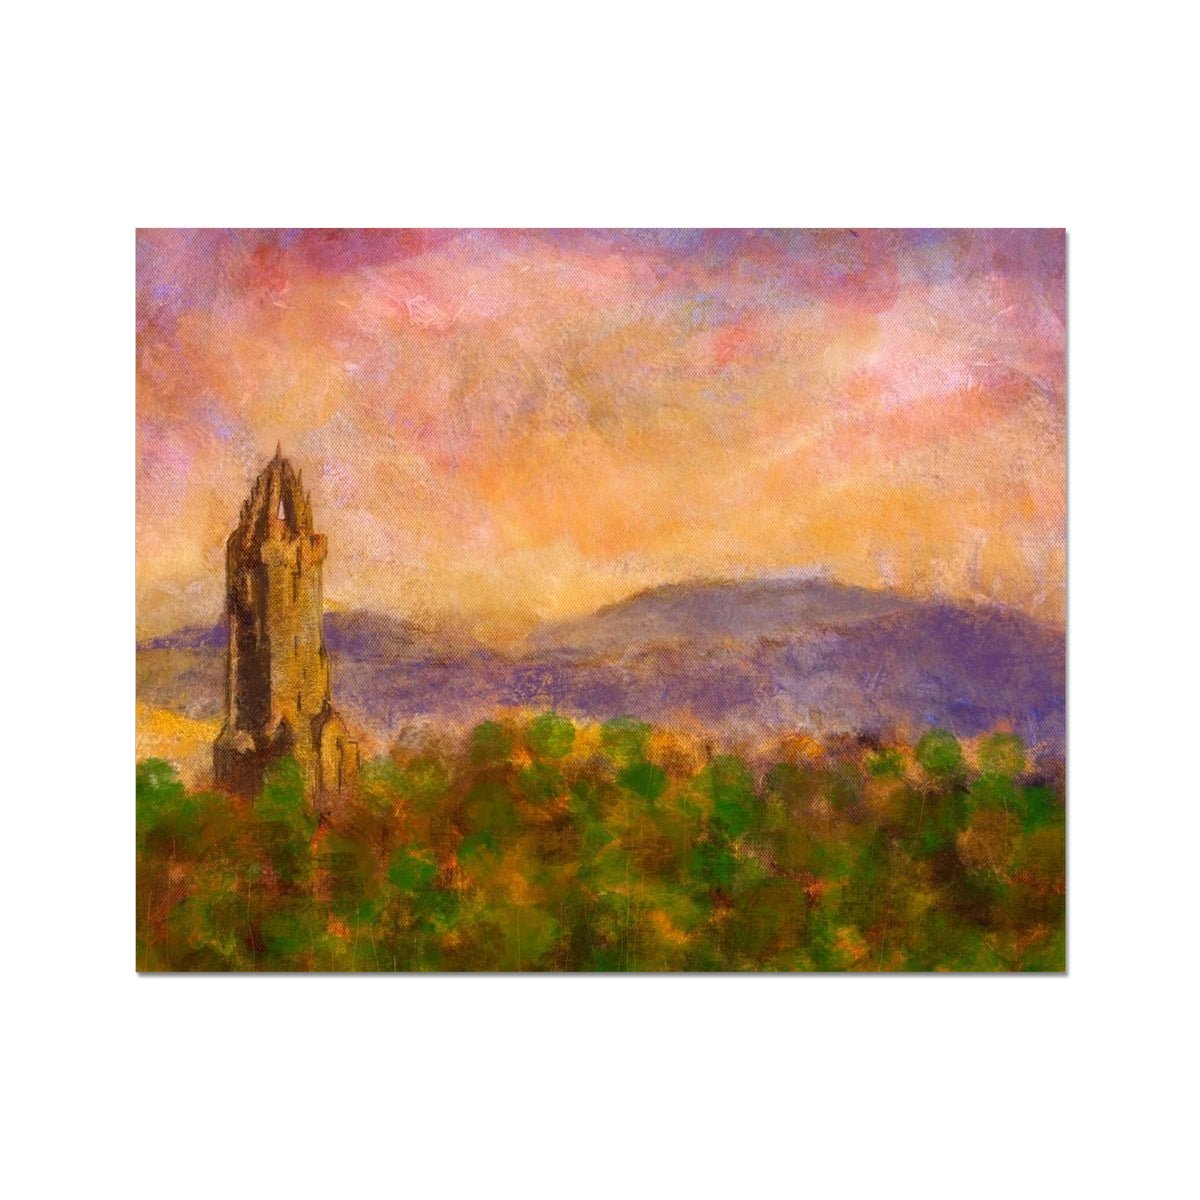 Wallace Monument Dusk Painting | Artist Proof Collector Prints From Scotland-Artist Proof Collector Prints-Historic & Iconic Scotland Art Gallery-20"x16"-Paintings, Prints, Homeware, Art Gifts From Scotland By Scottish Artist Kevin Hunter